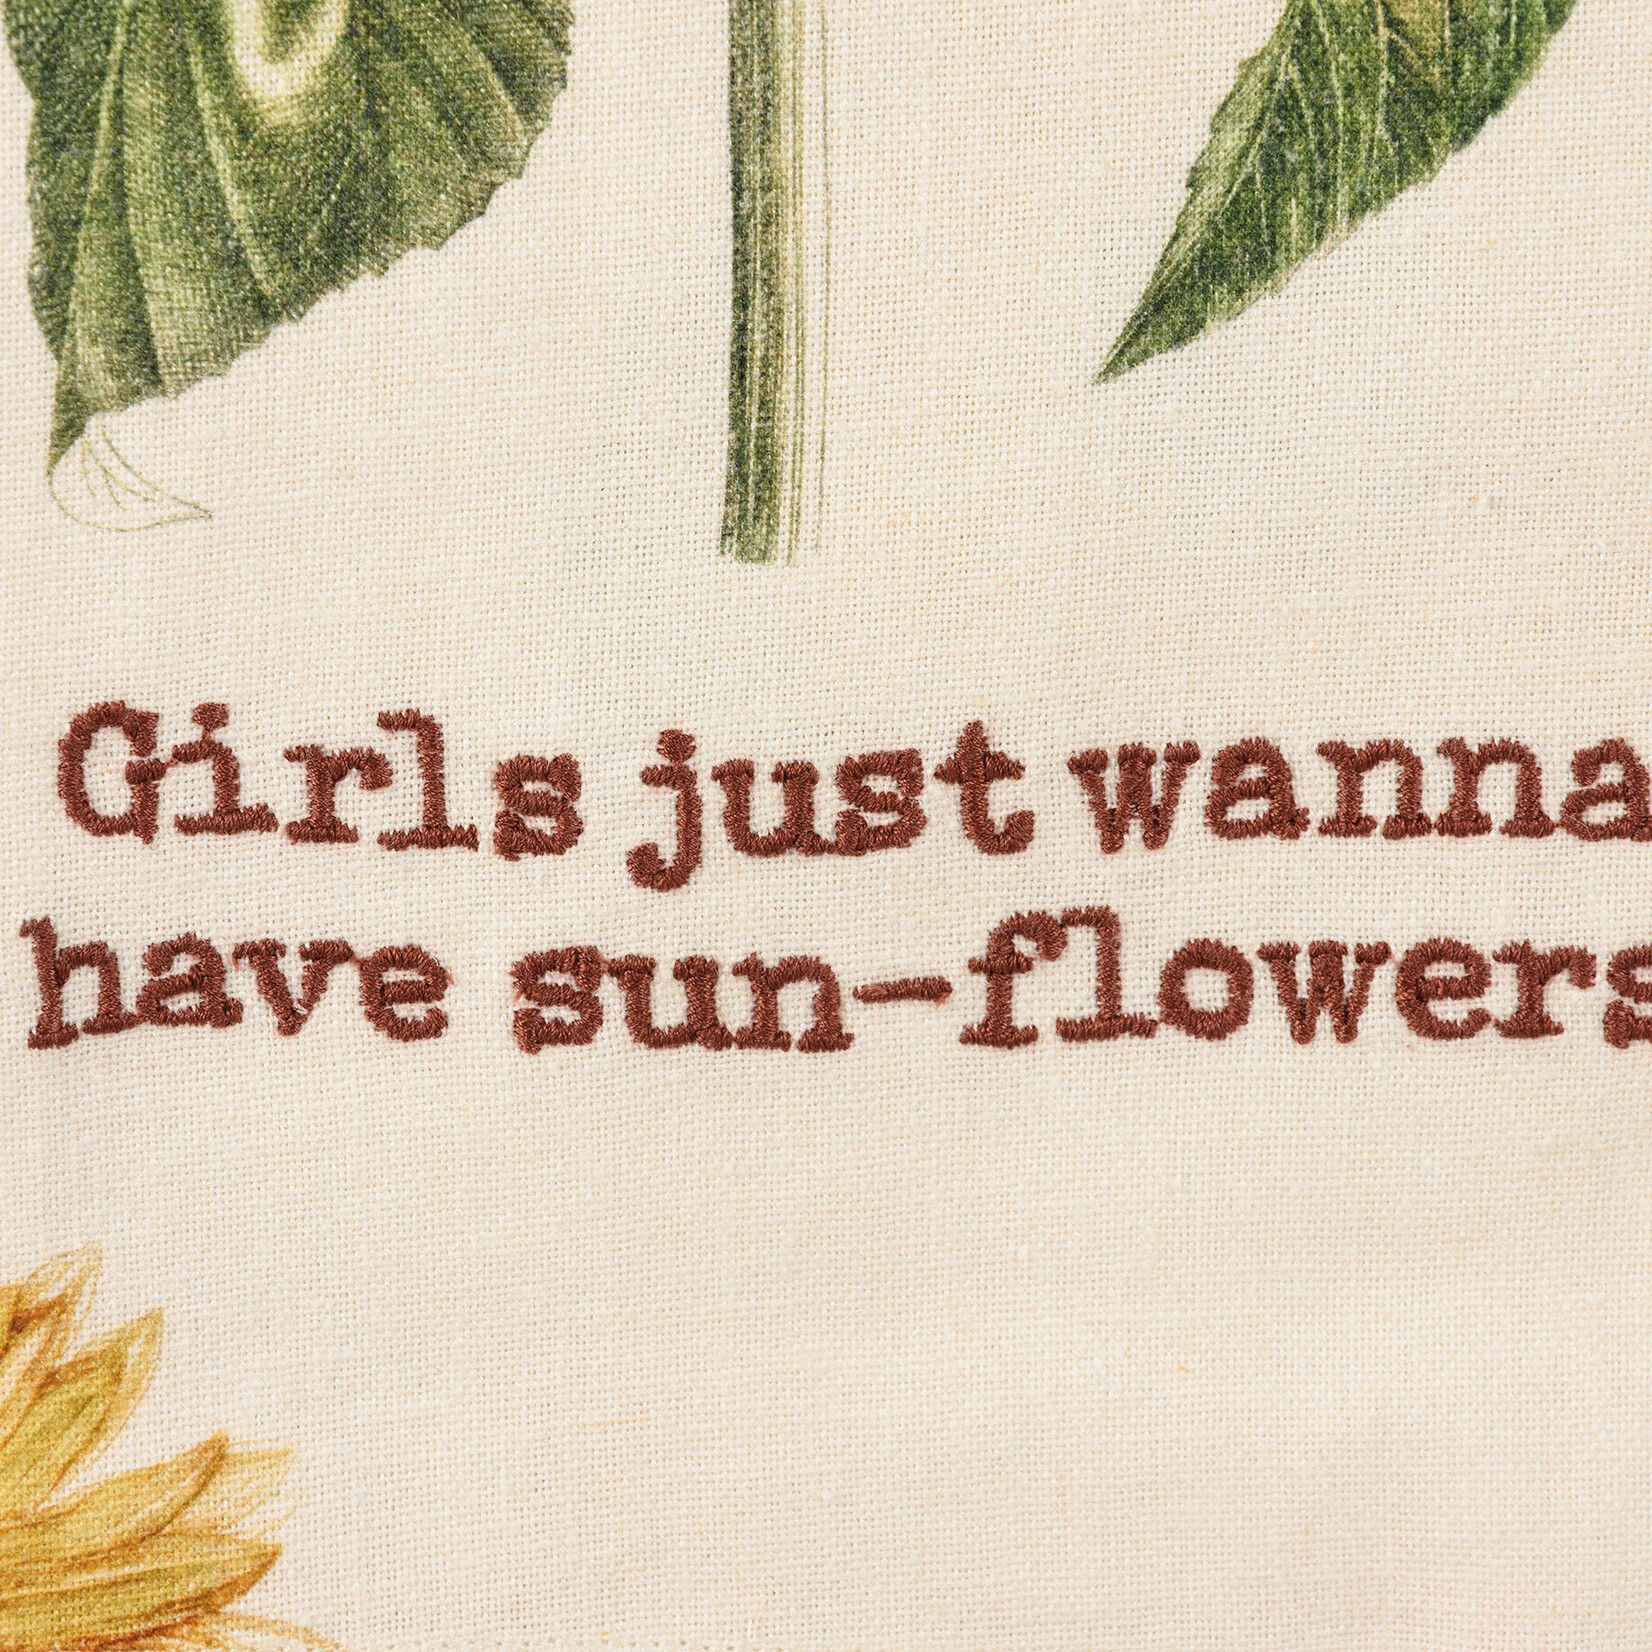 Primitives by Kathy Primitives by Kathy Girls Just Wanna Have Sun-Flowers Kitchen Towel